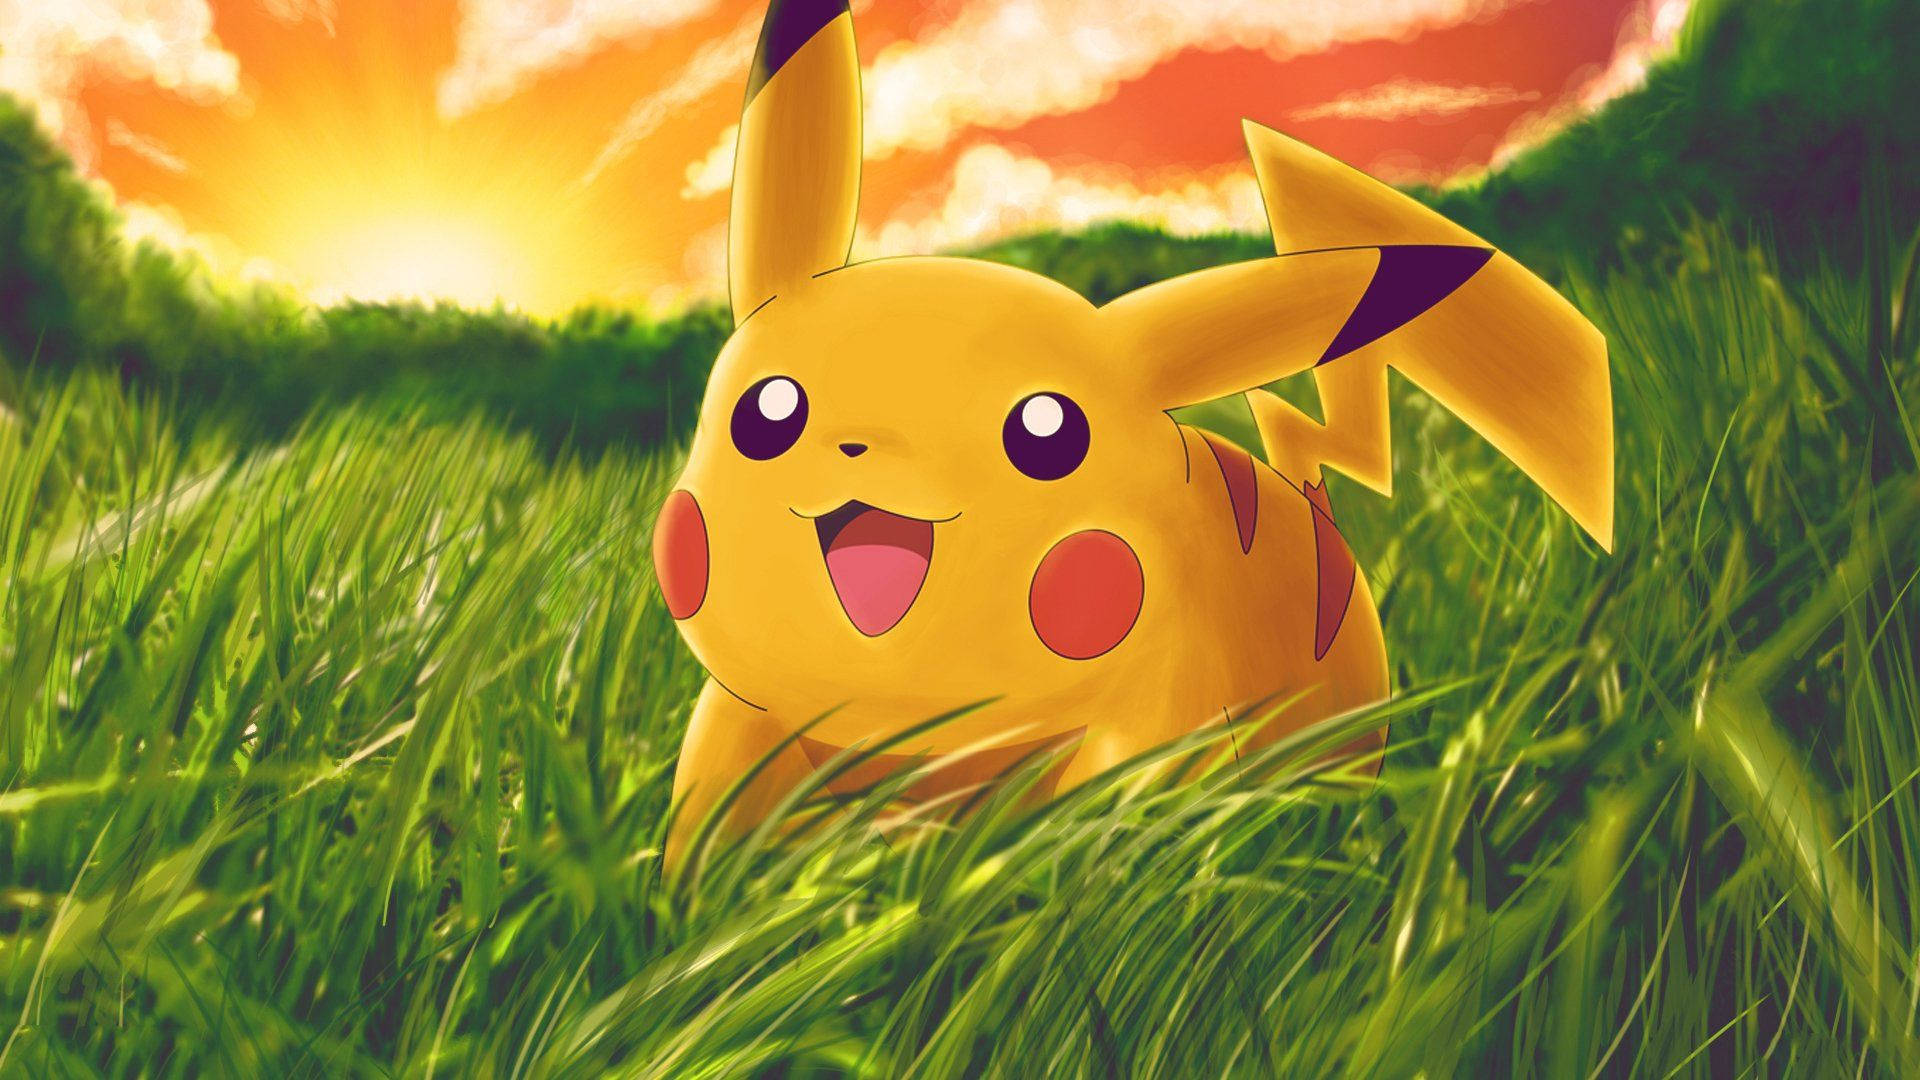 "A Hopeful Pikachu Enjoys Life in the Great Outdoors" Wallpaper